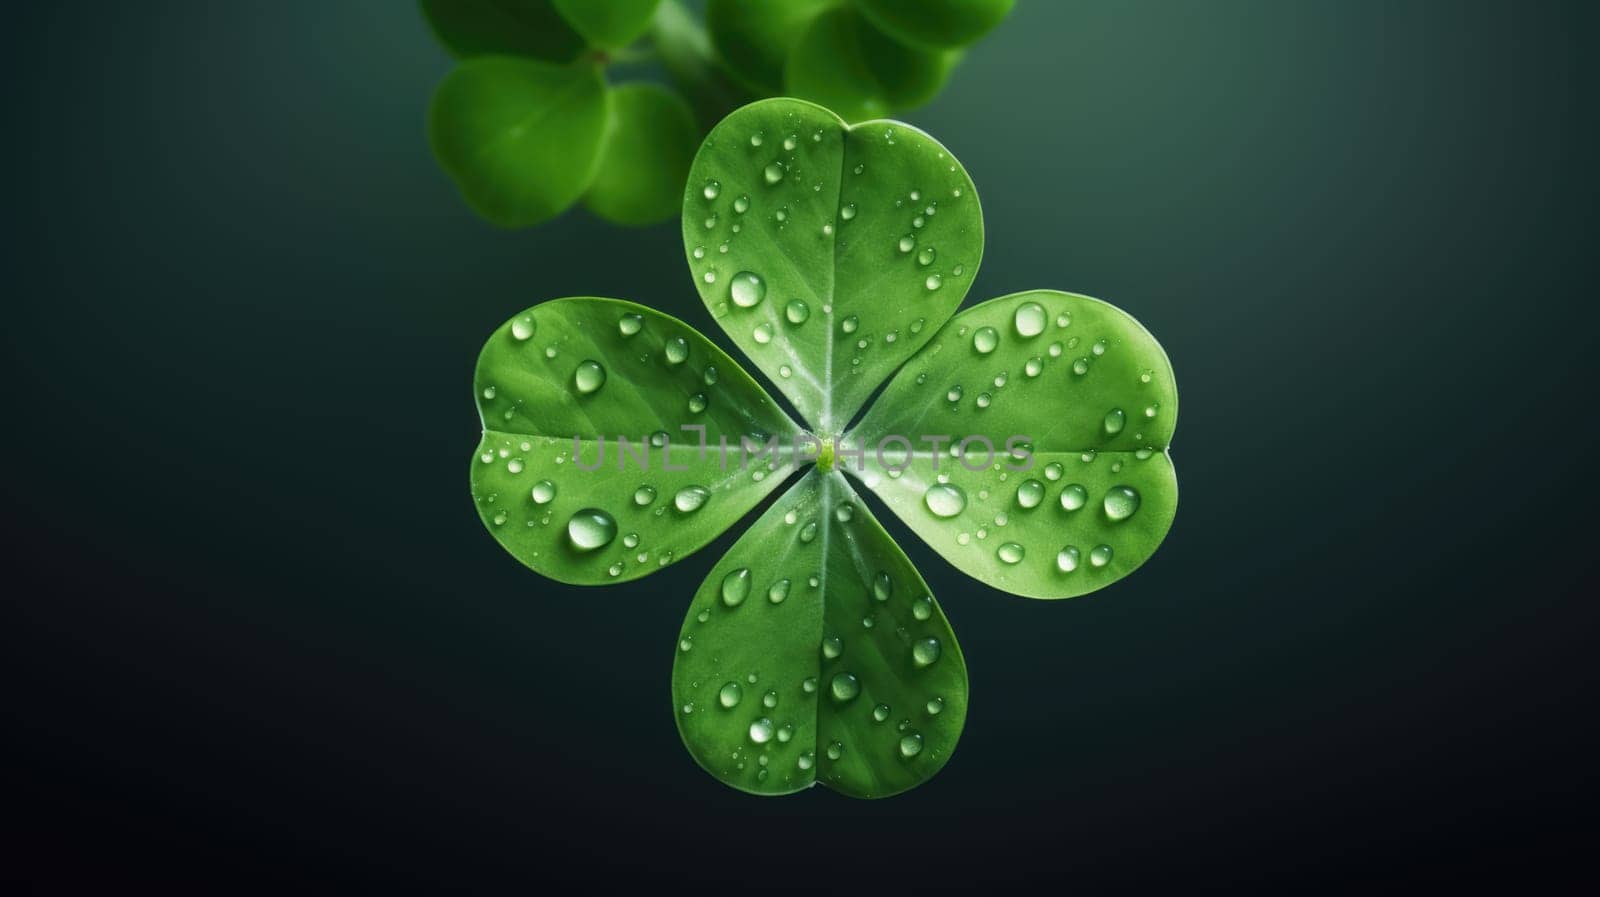 This is a photograph of a fresh green four-leaf clover isolated on a white background. The clover is a symbol of good luck and is often used in St. Patricks Day celebrations.